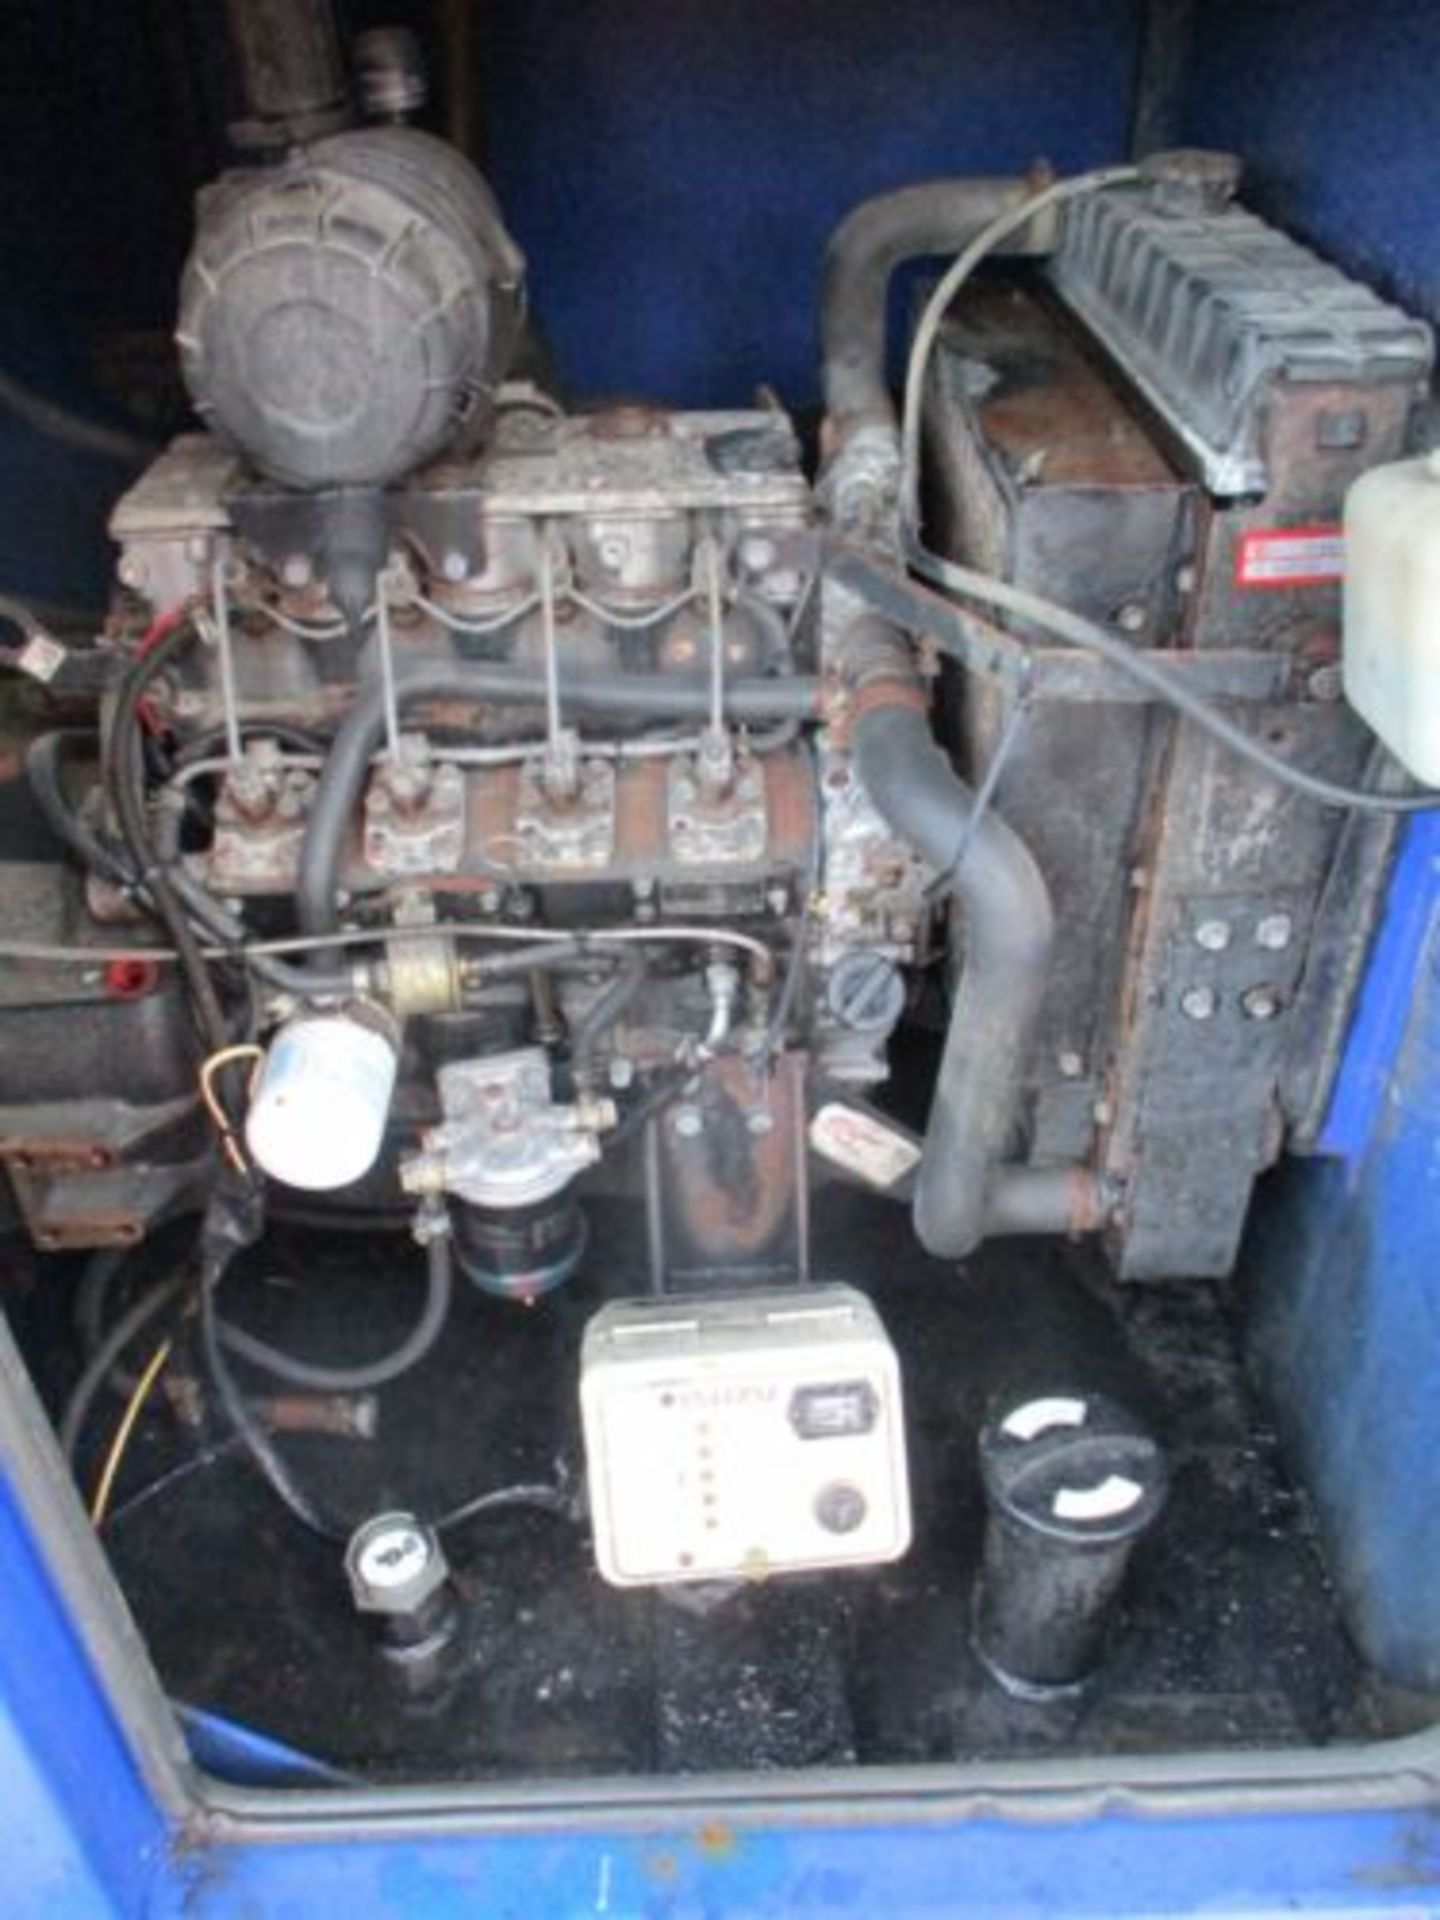 SYKES CP150 6 INCH " WATER PUMP ISUZU DIESEL ENGINE GODWIN DELIVERY ARRANGED - Image 4 of 8